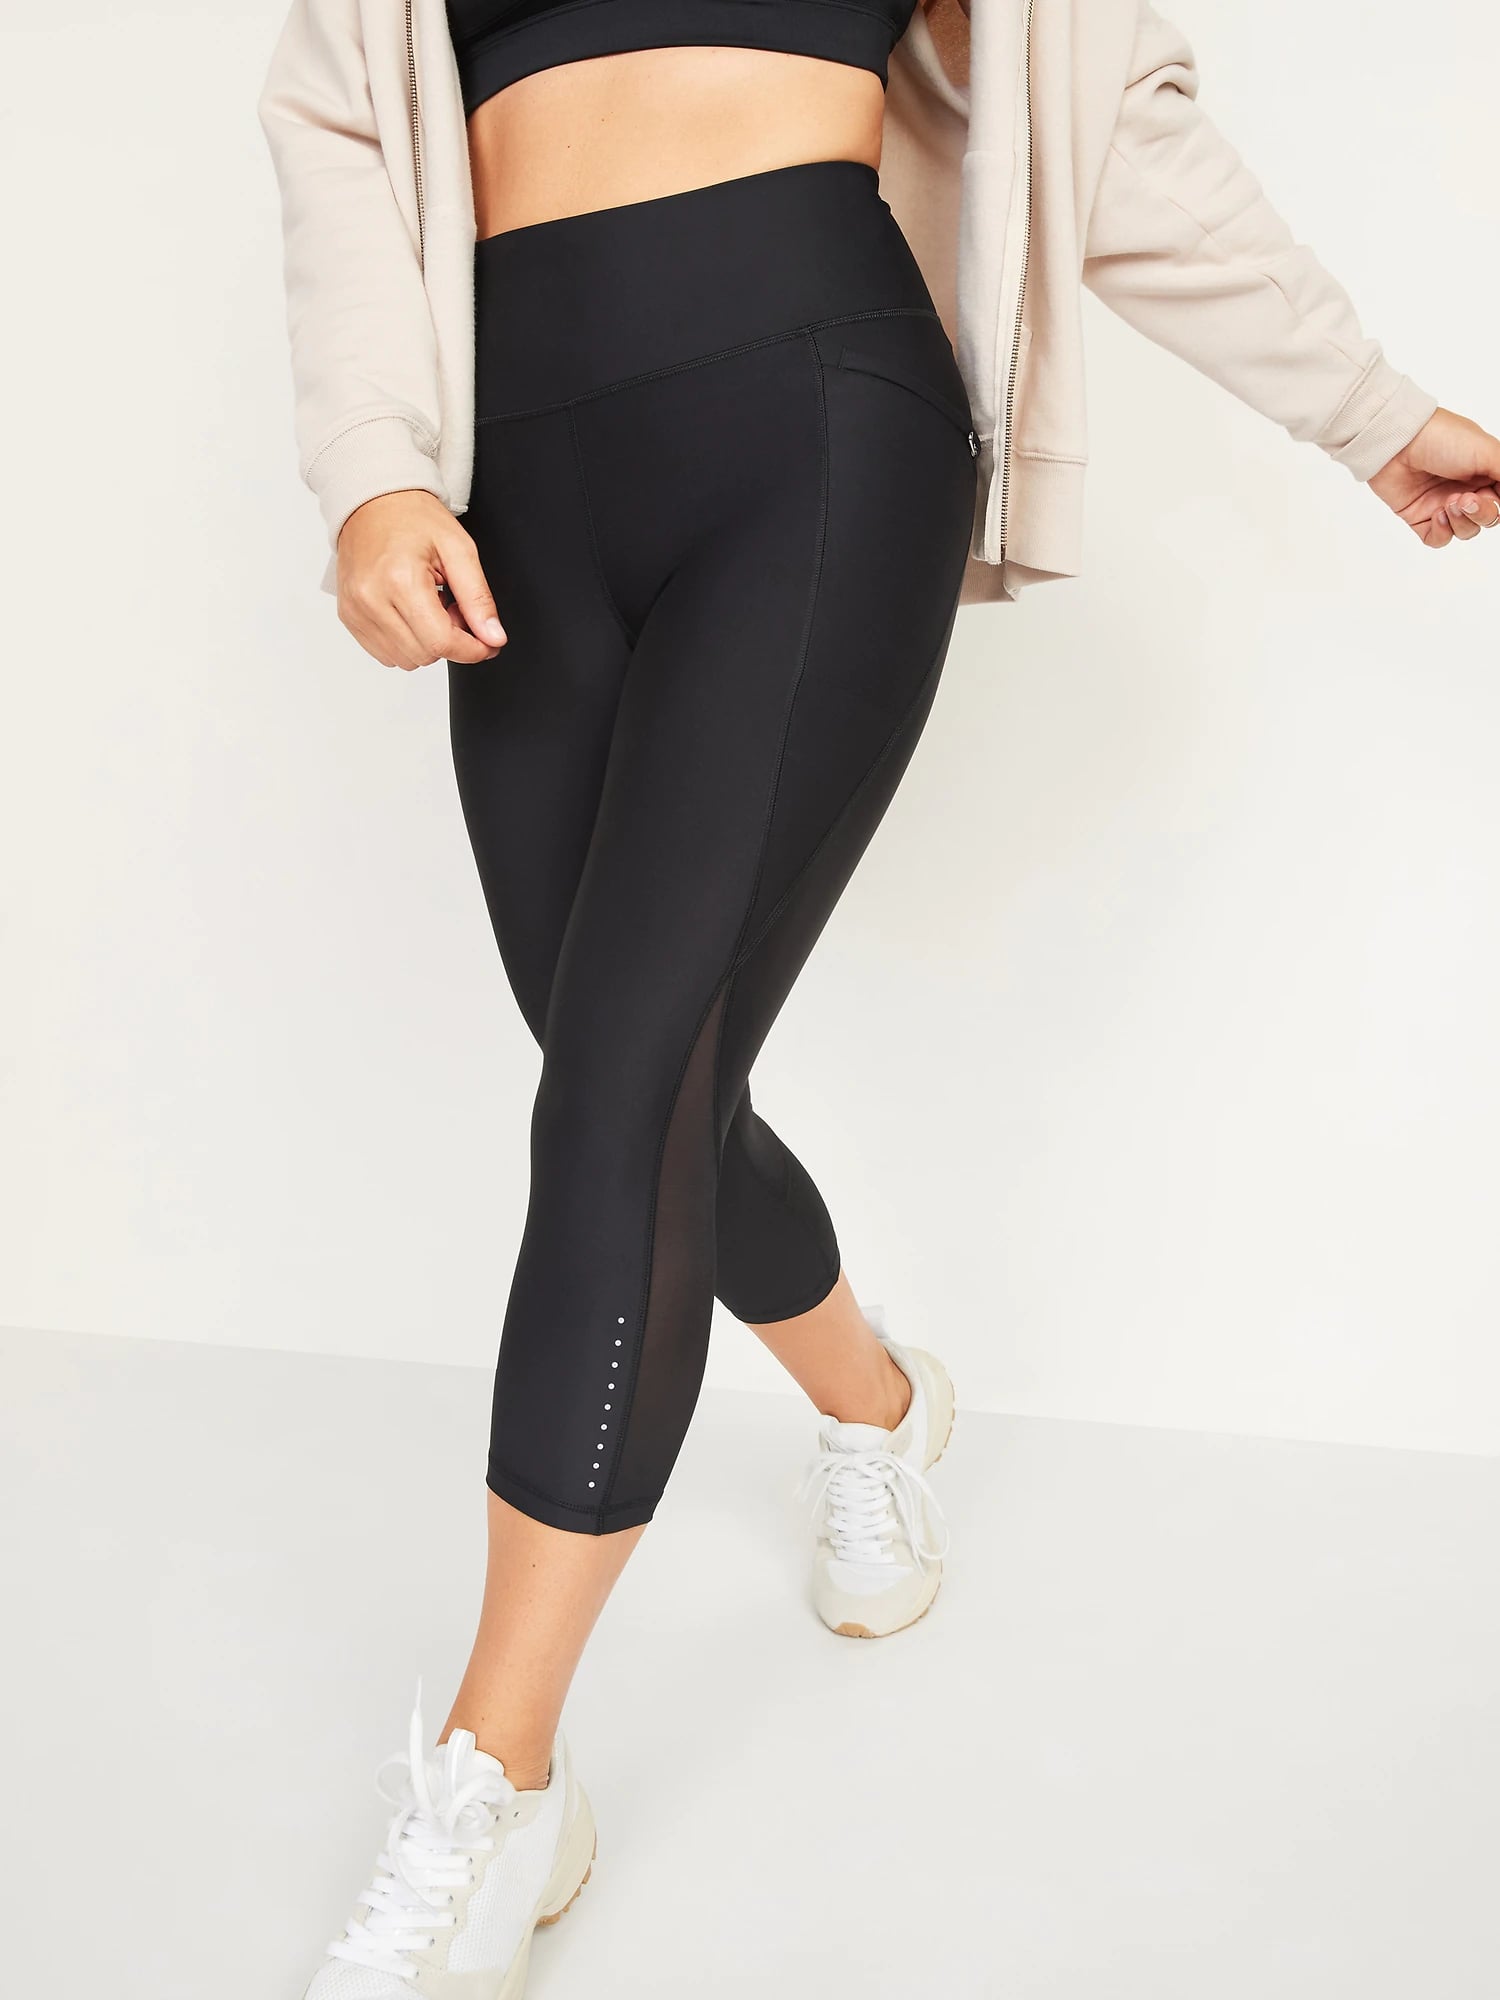 Old Navy Leggings Review 2020  International Society of Precision  Agriculture